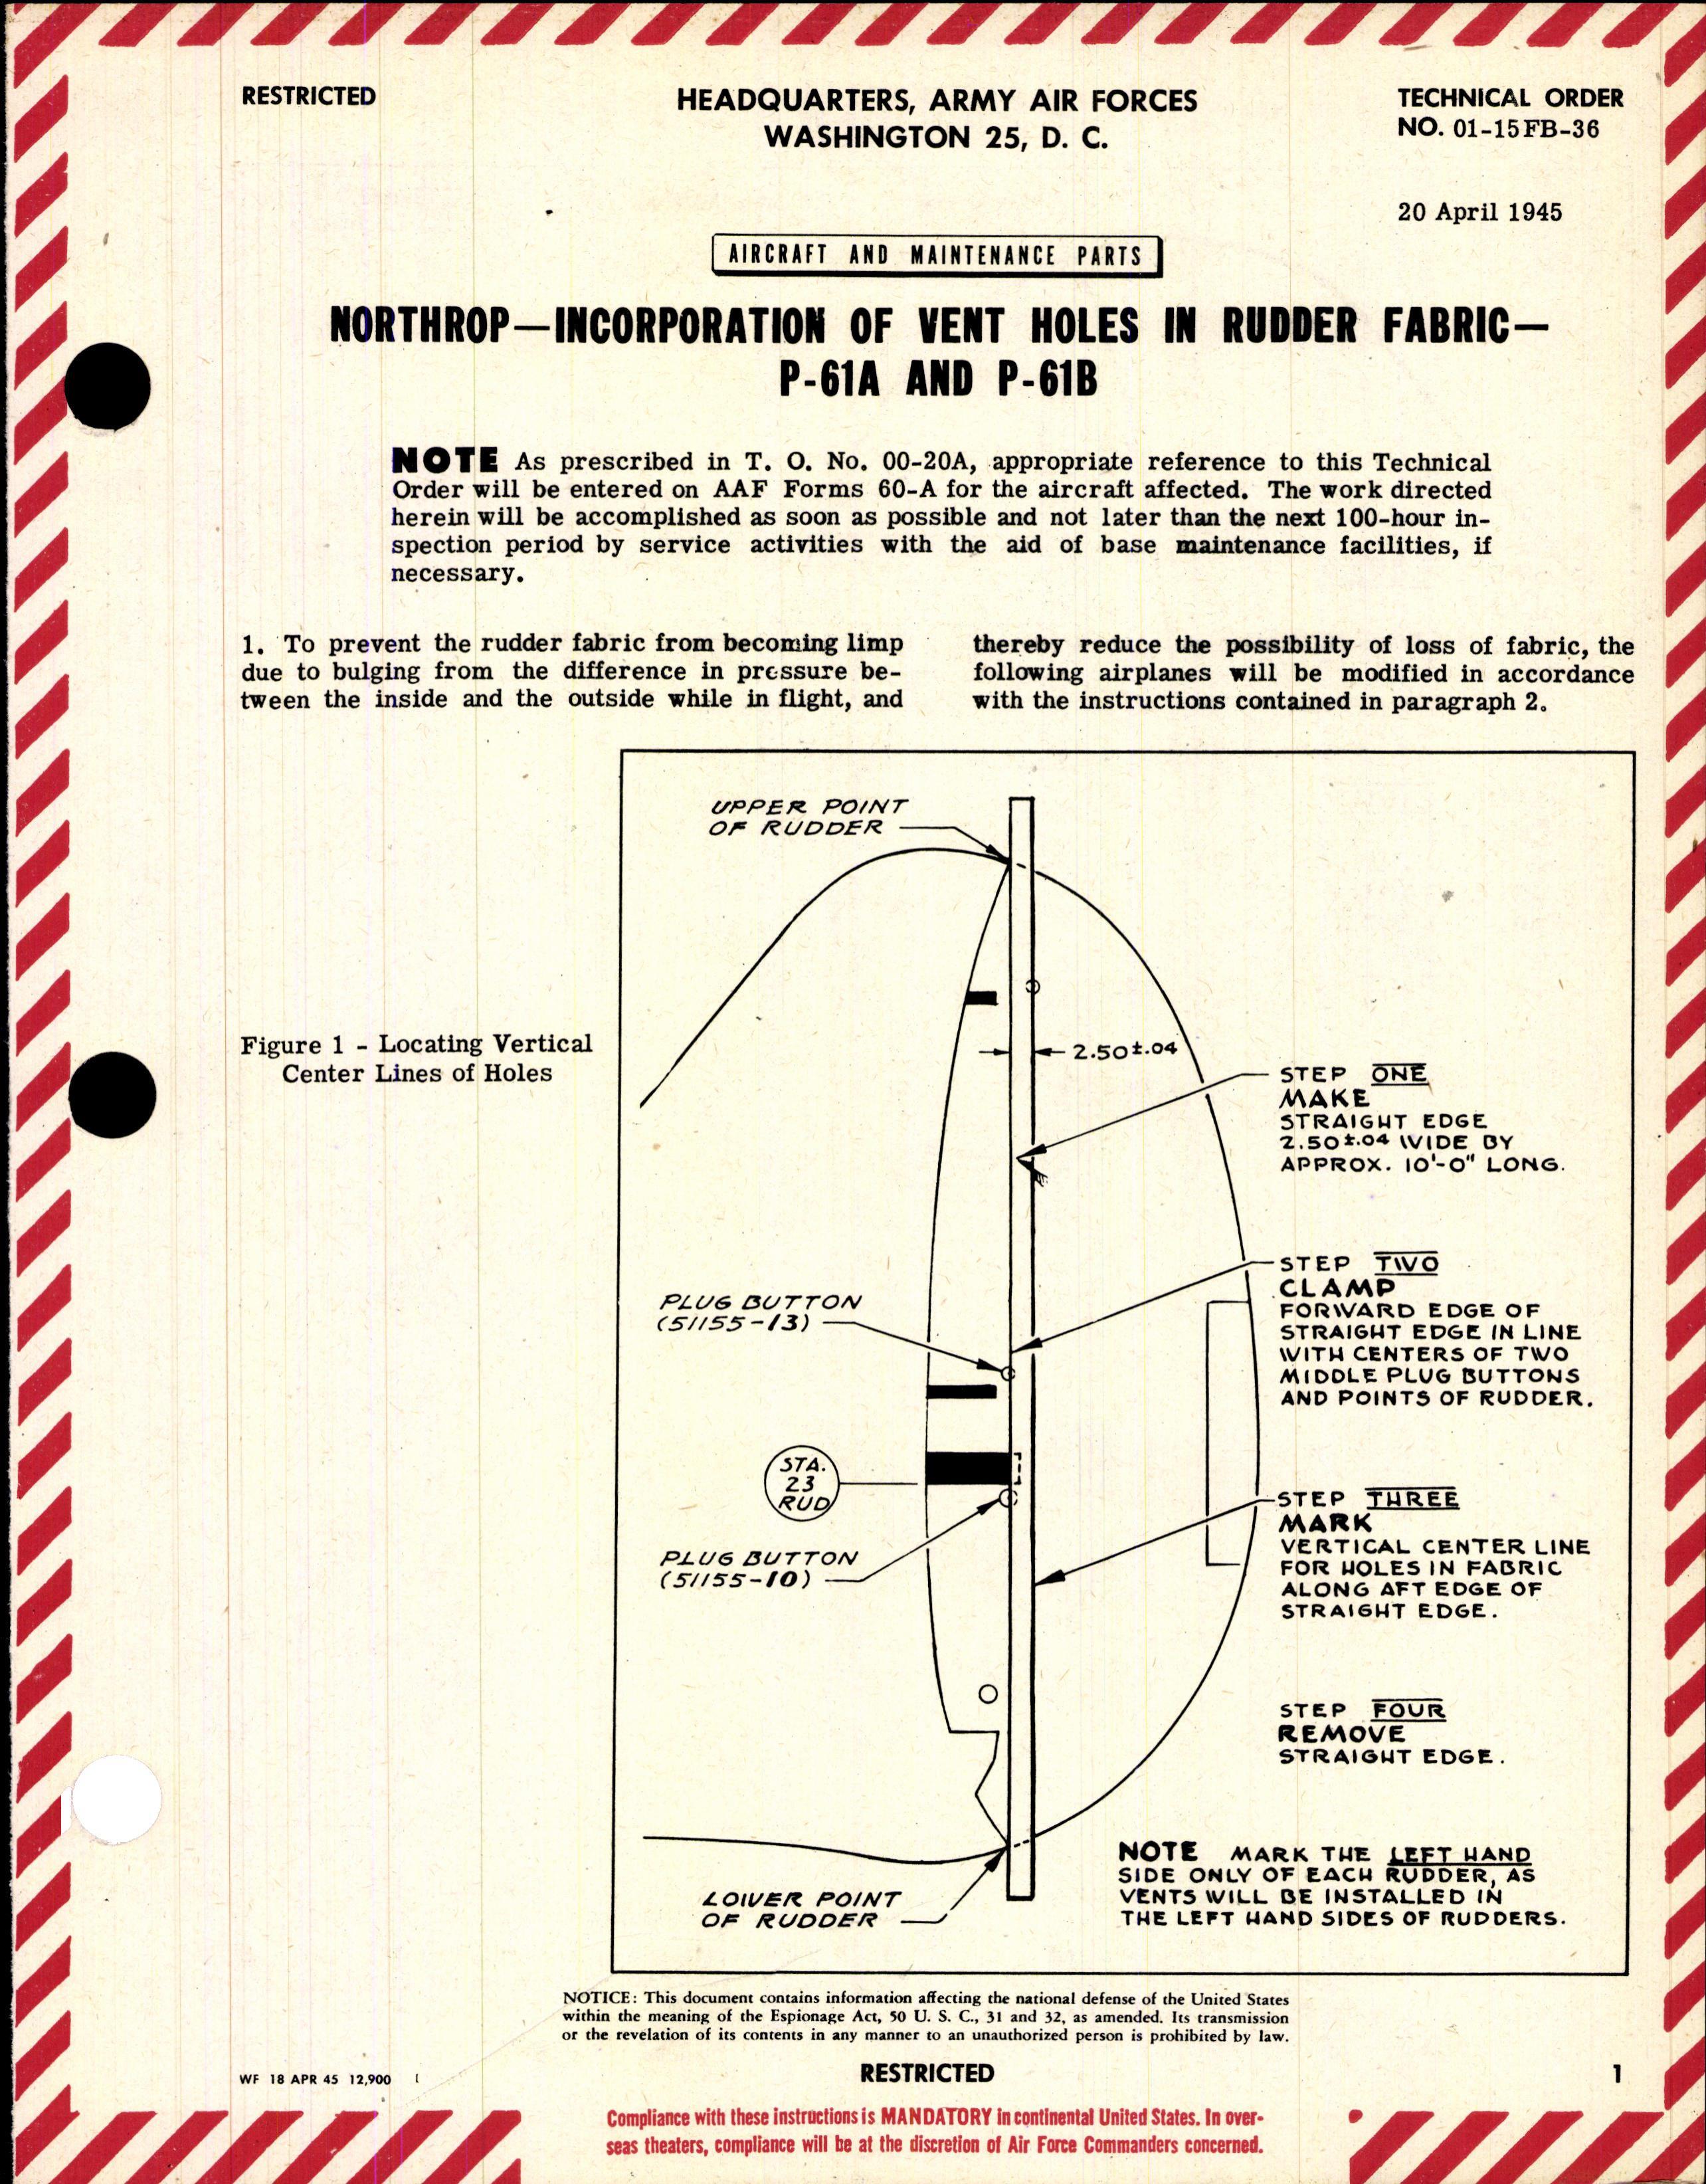 Sample page 1 from AirCorps Library document: Incorporation of Vent Holes in Rudder Fabric for P-61A and P-61B